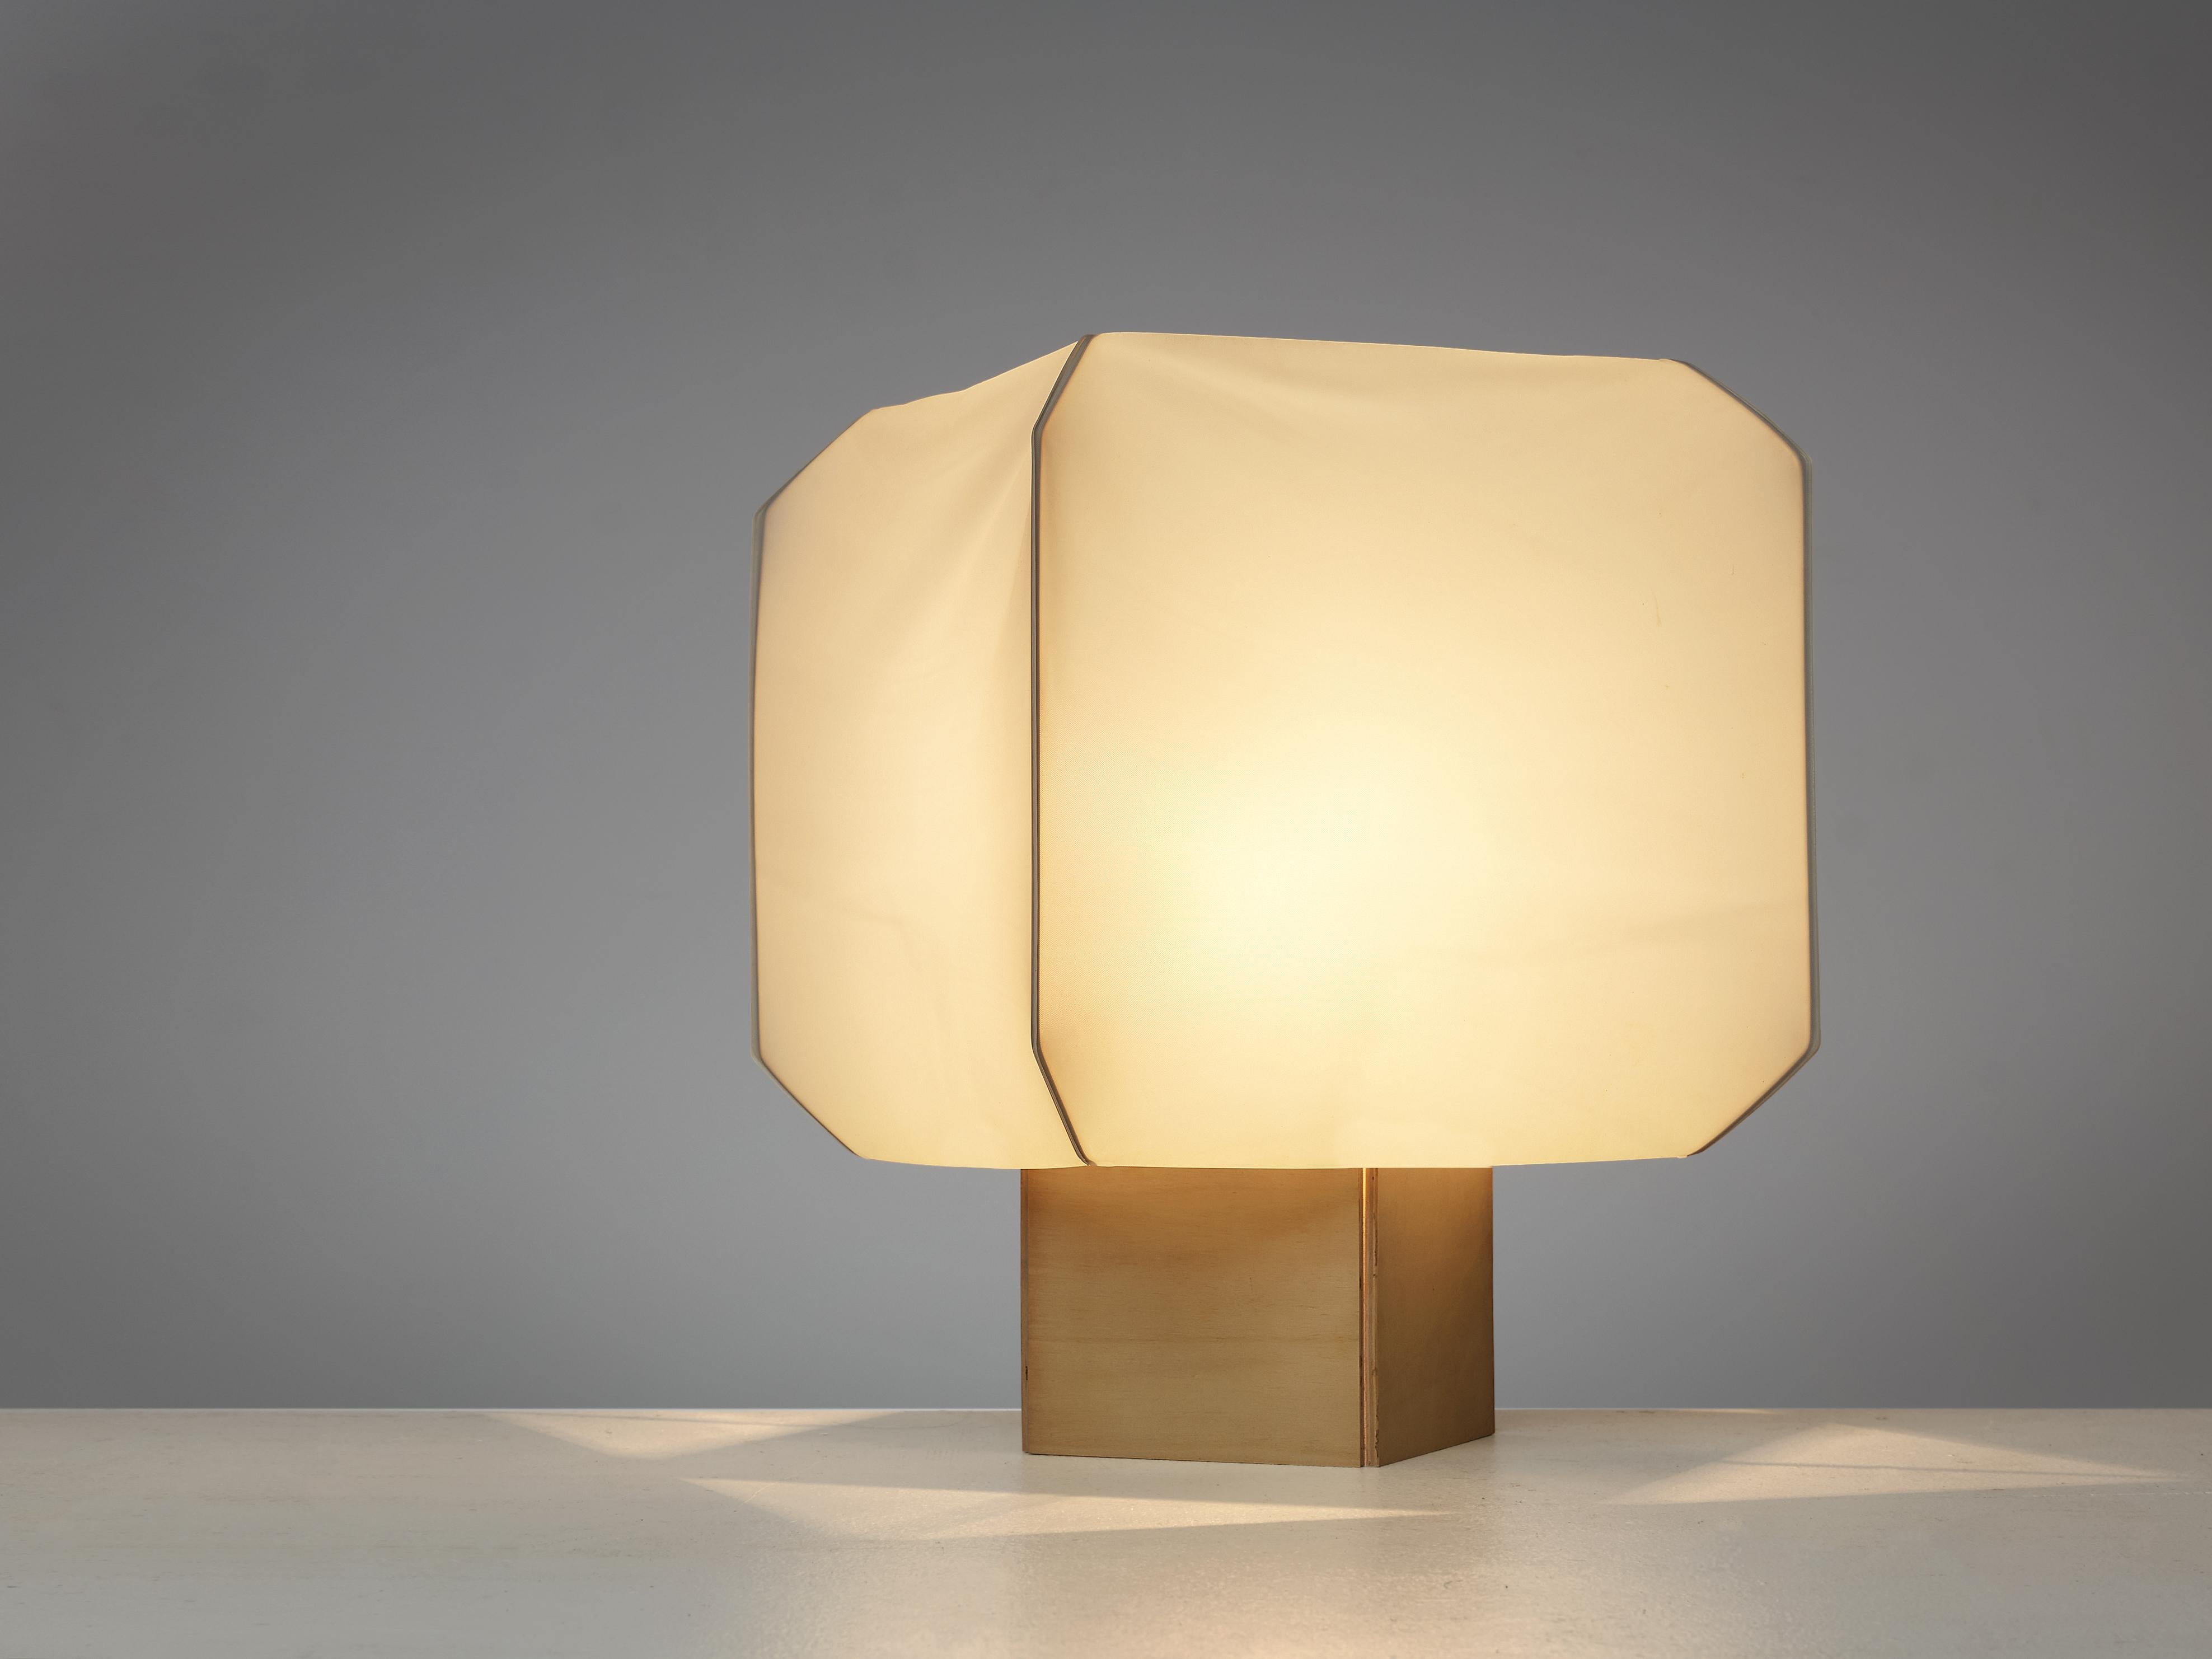 Bruno Munari for Danese, table lamp 'Bali', wood, plastic, brass, Italy, 1958

This 'Bali' table lamp by Bruno Munari has a warm light. The white plastic shades that are adjusted on a metal frame create a soft, indirect light. The color of the